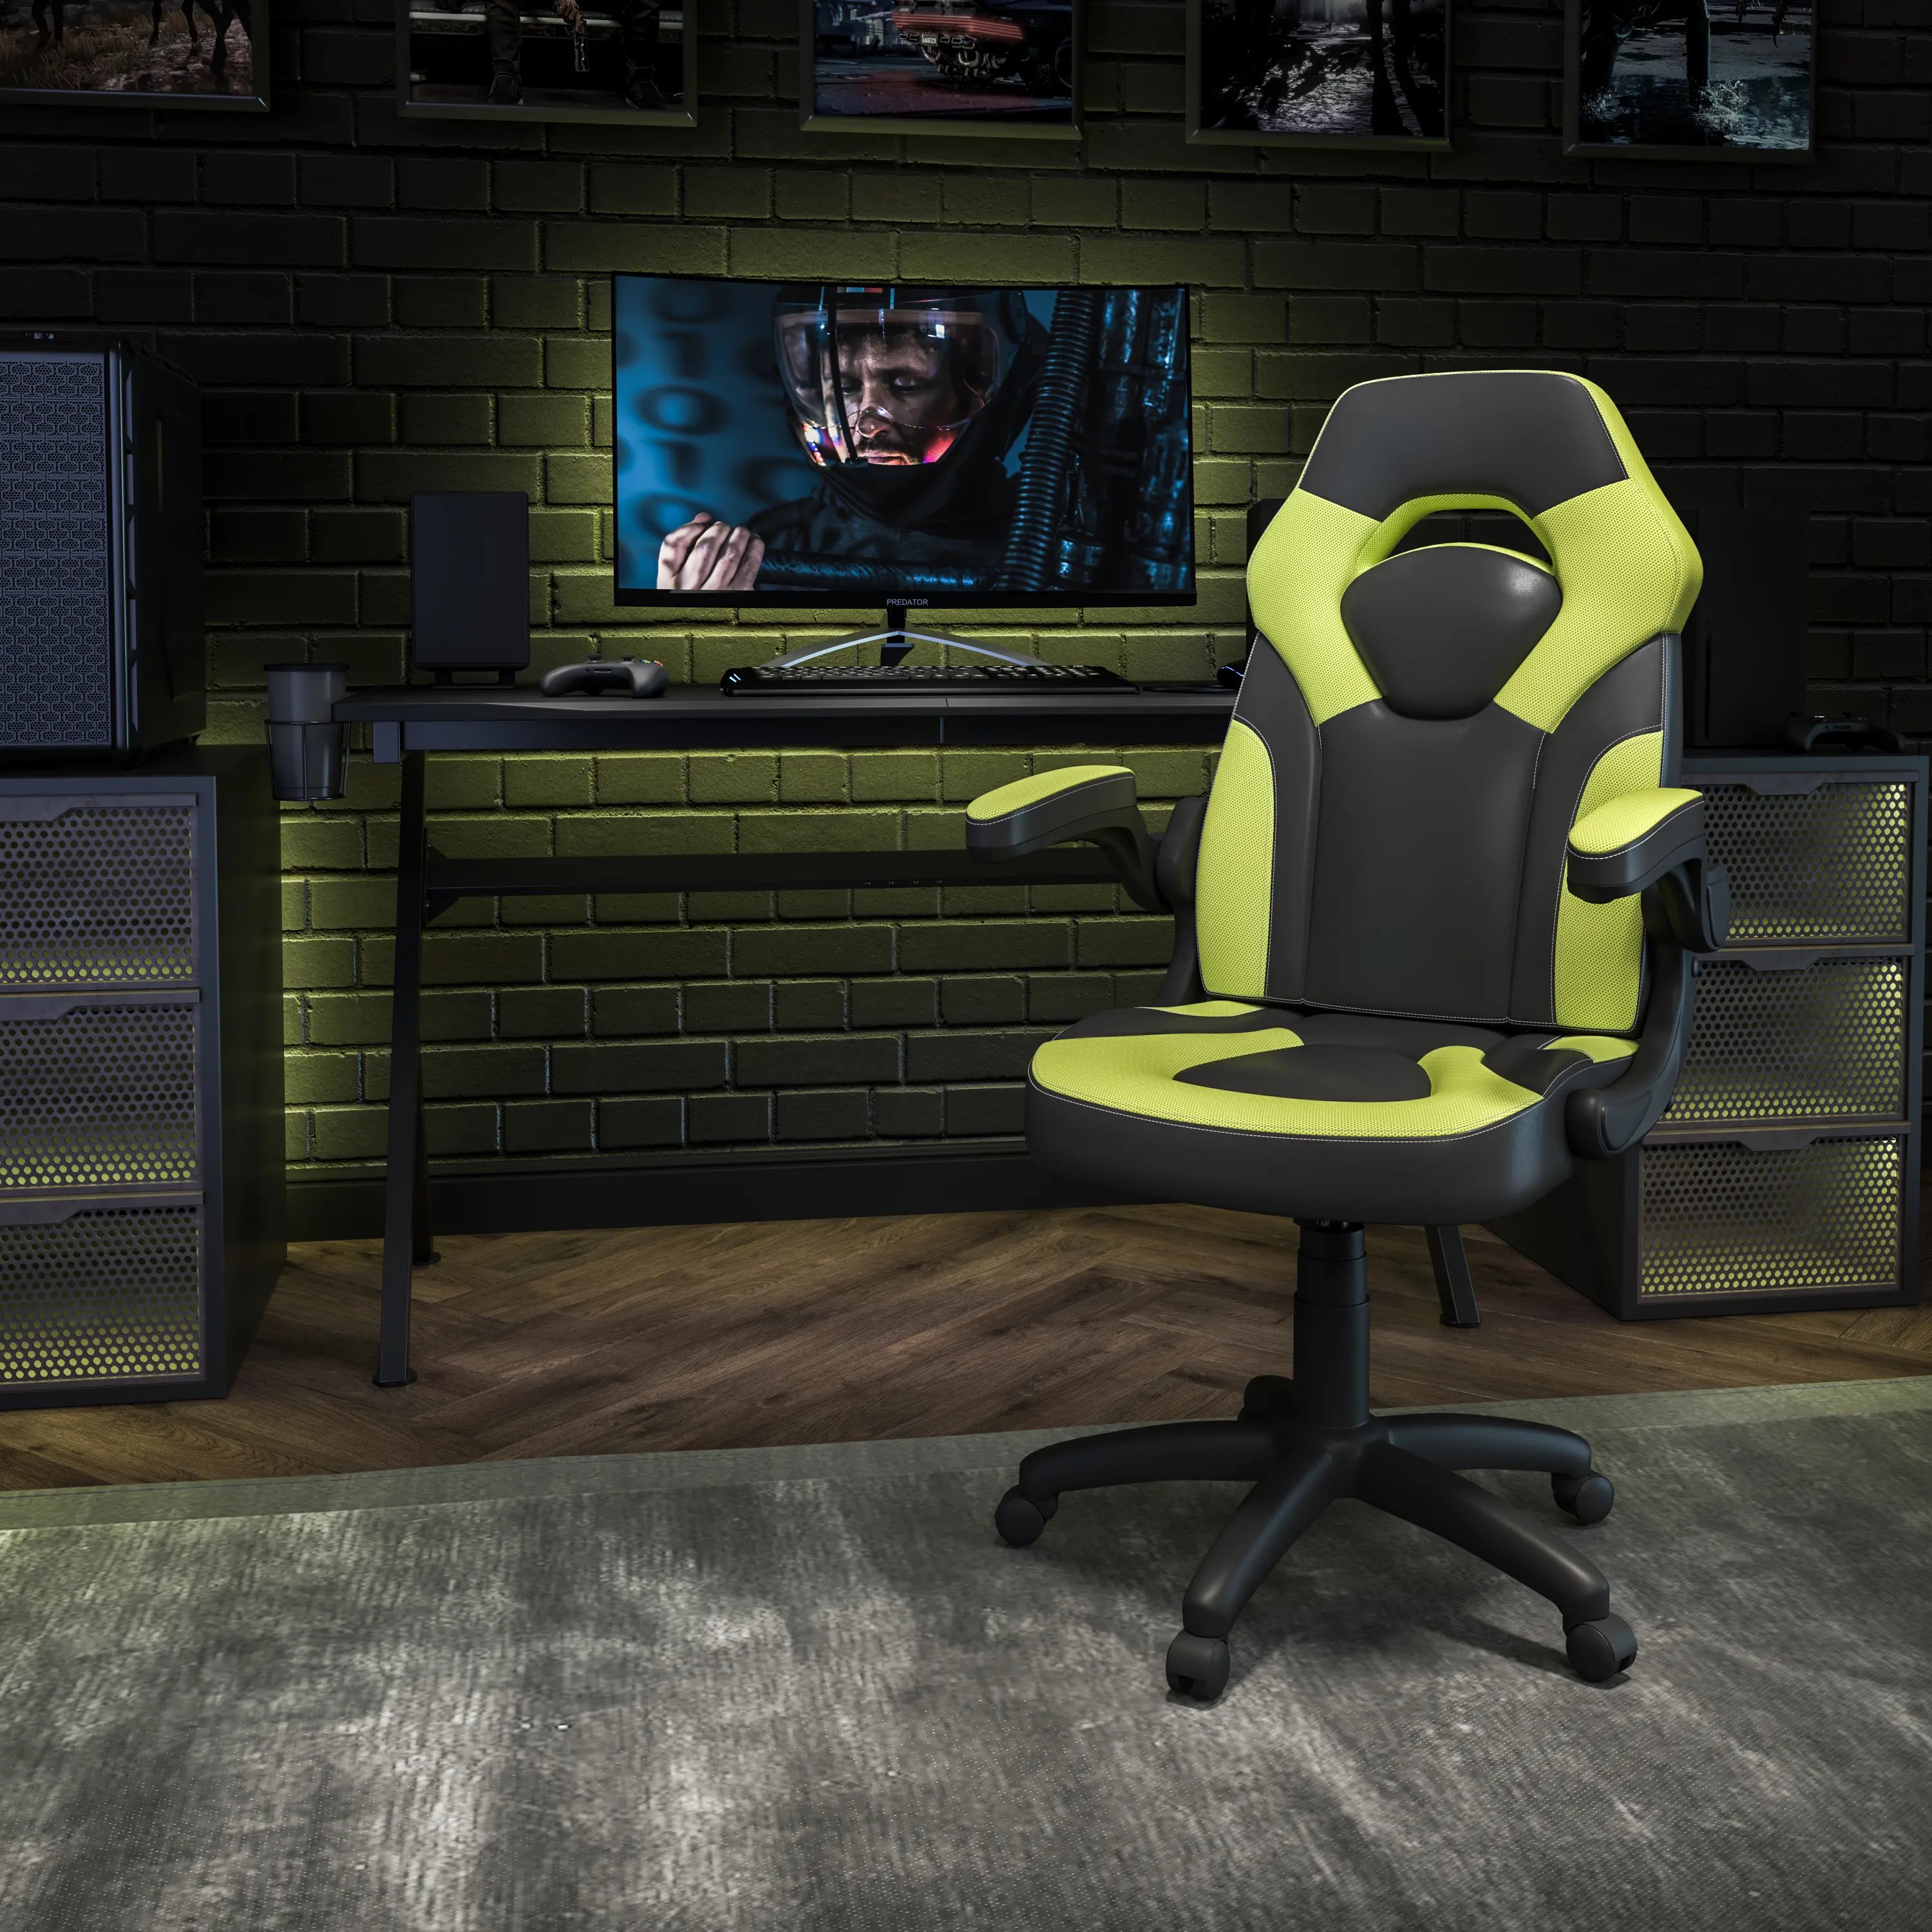 X10 Green and Black Gaming Swivel Chair